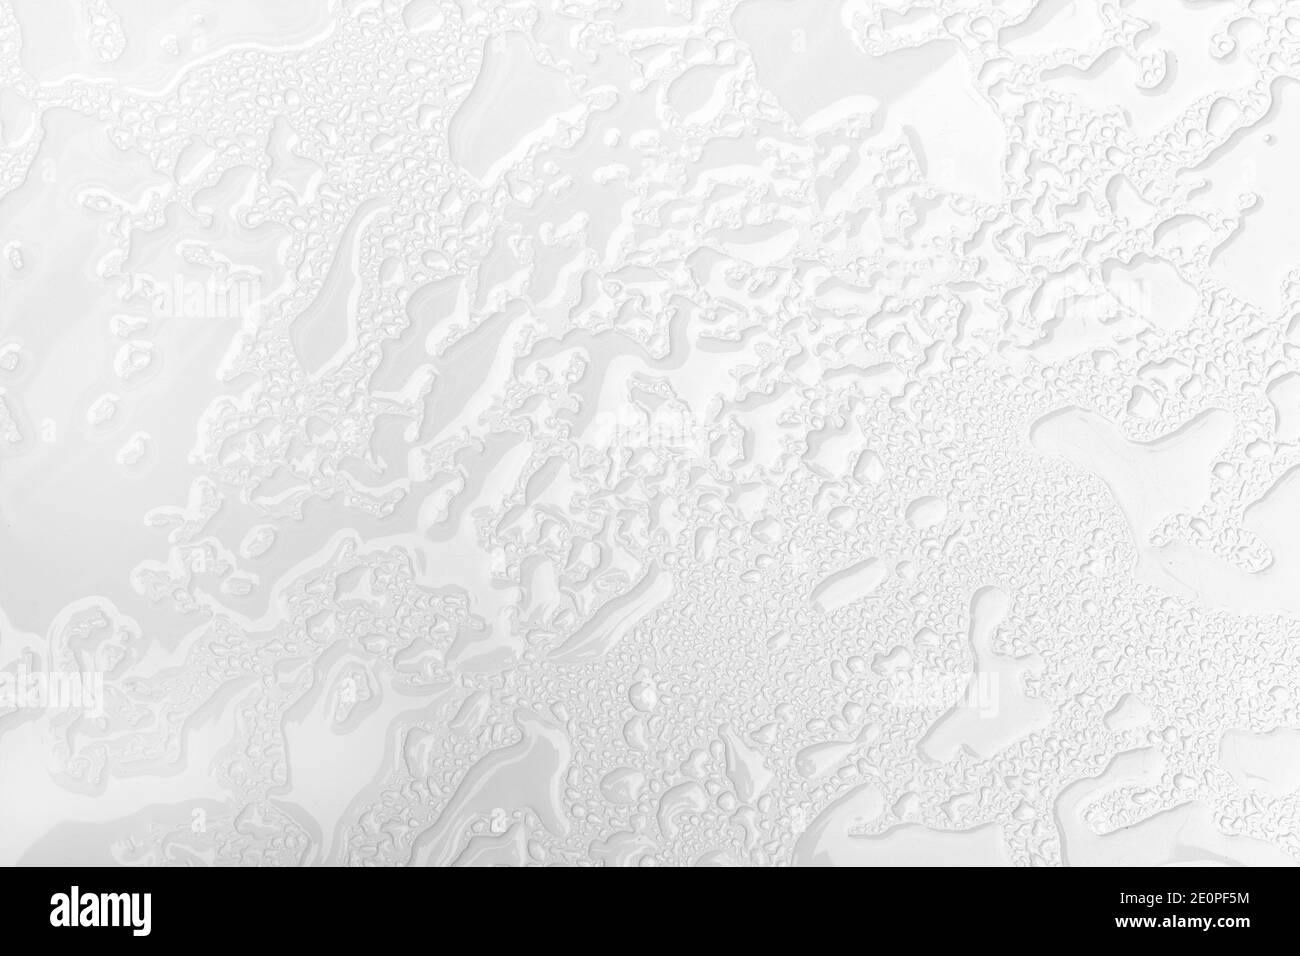 Abstract background of wet white surface with raindrops. Close up Stock Photo